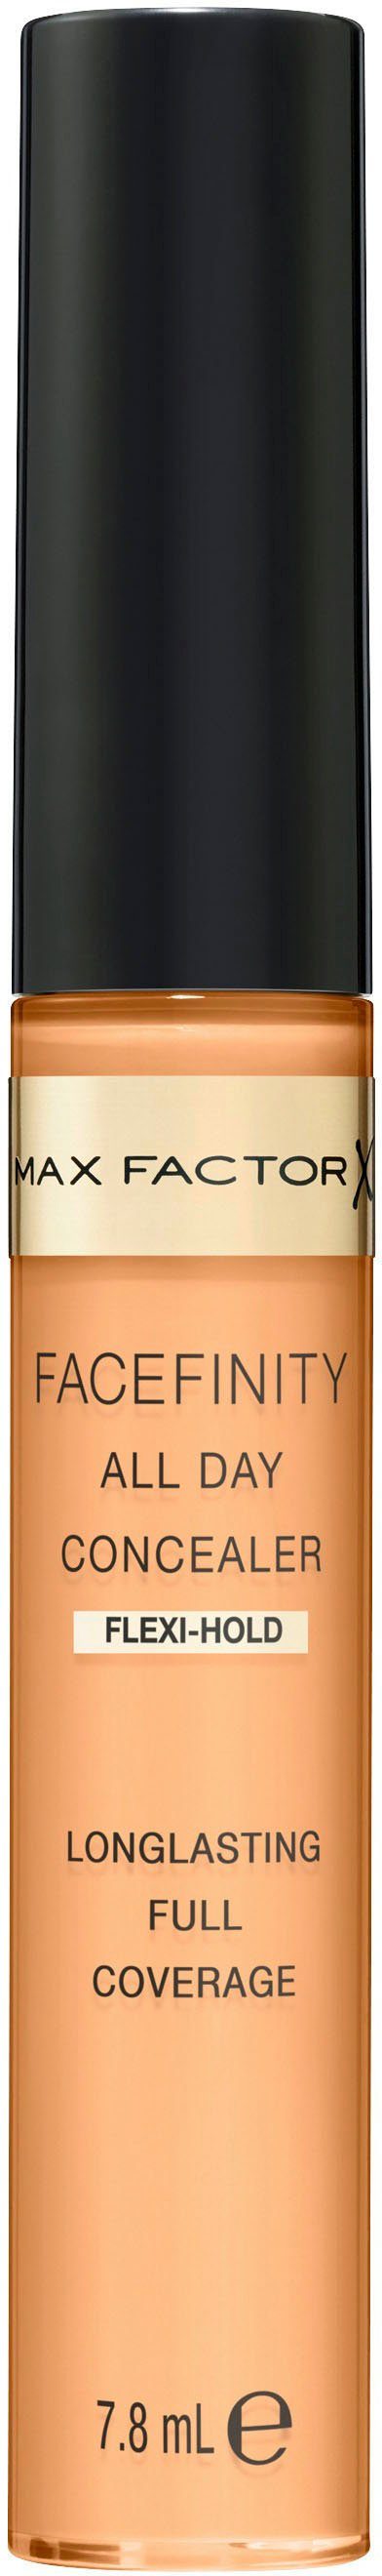 MAX Concealer Day 70 All Flawless FACTOR FACEFINITY